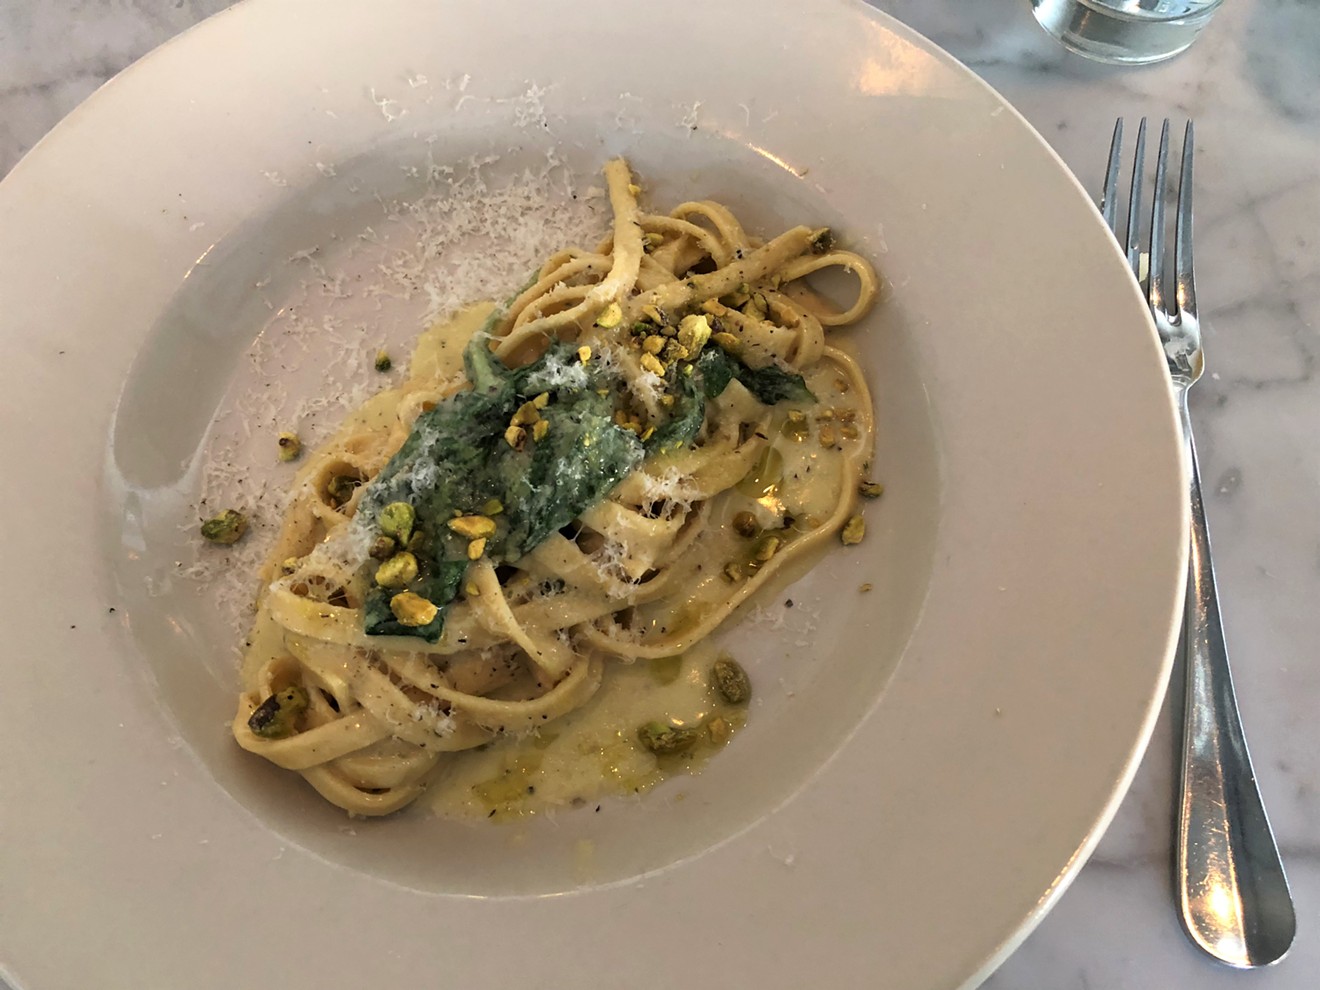 Tagliatelle with lemon from Tratto